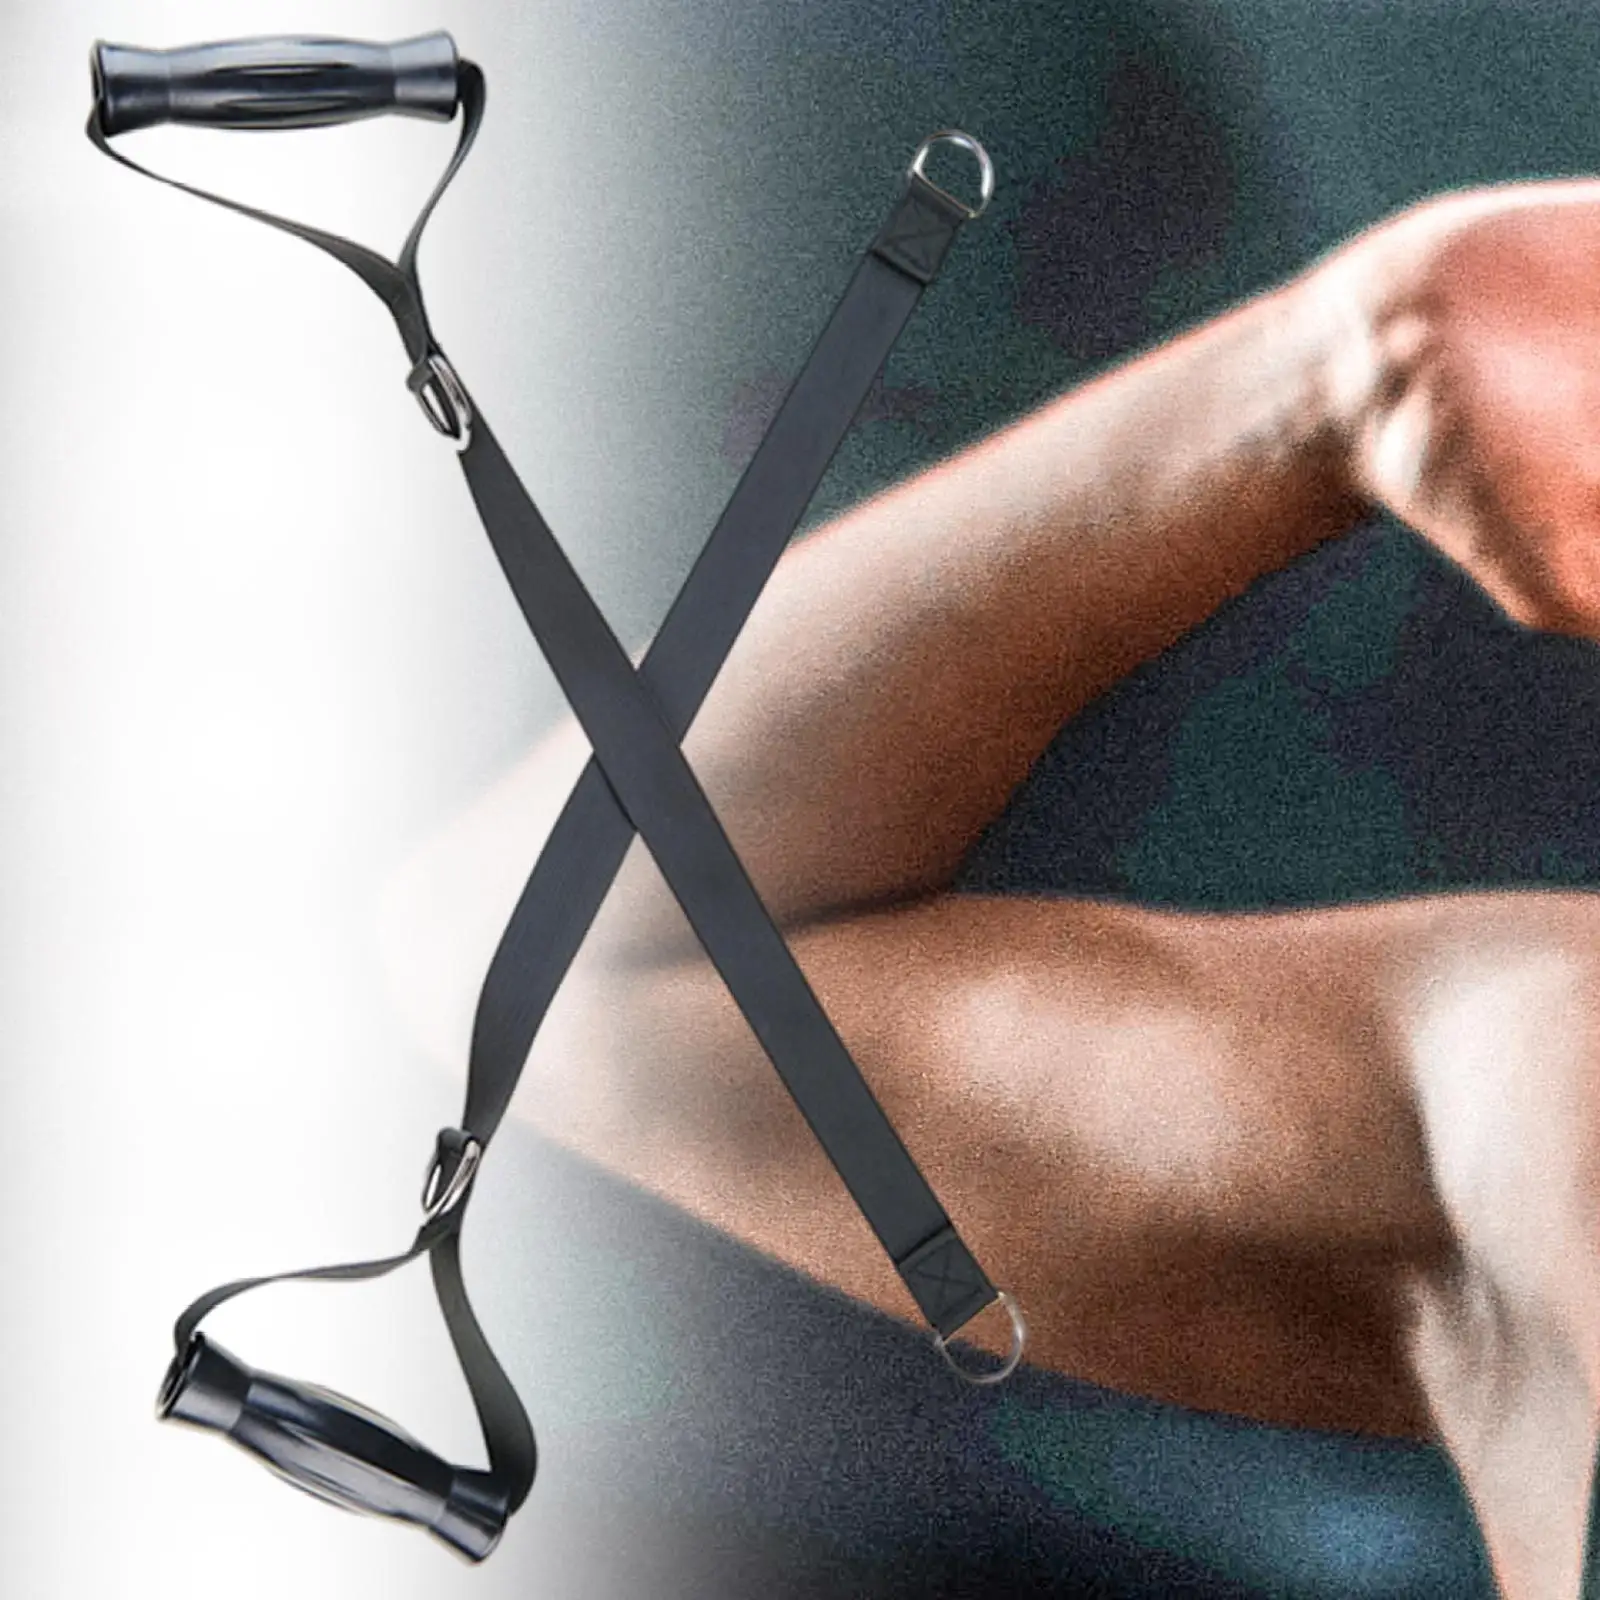 Triceps Pull Fitness Equipment Accessories for Exercise Home Use